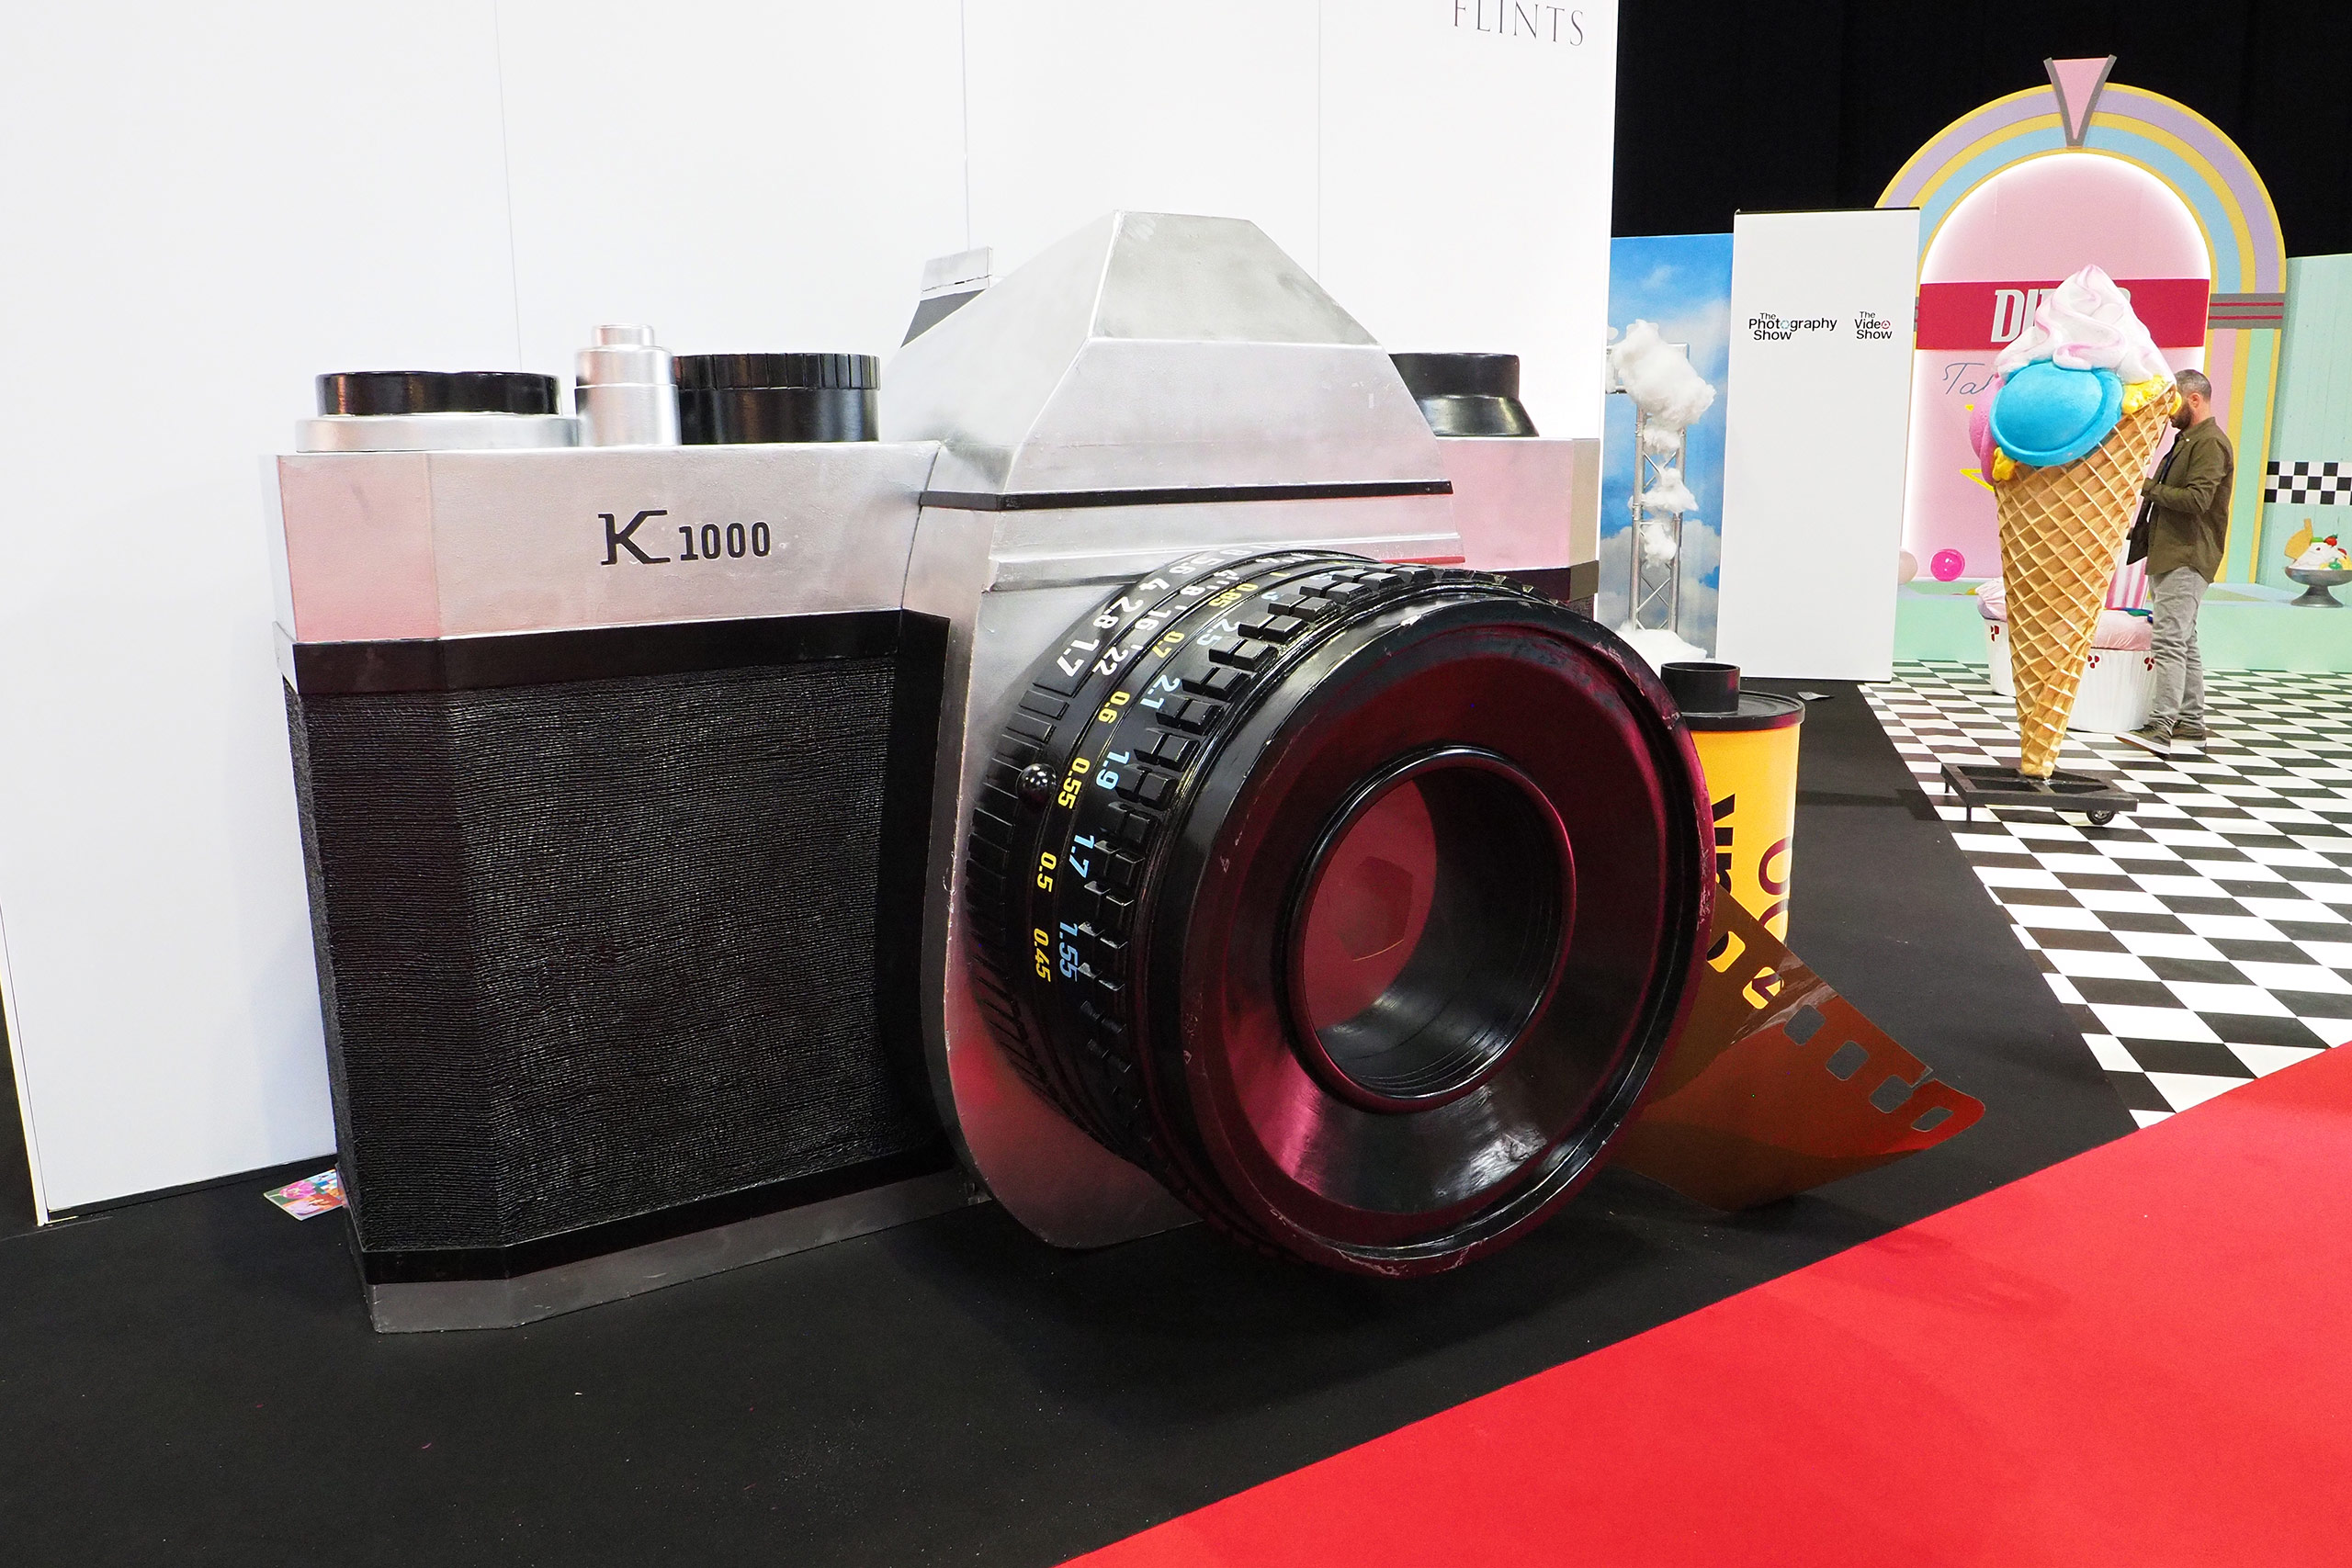 A Giant "Pentax" K1000 was on display at The Photography Show 2022